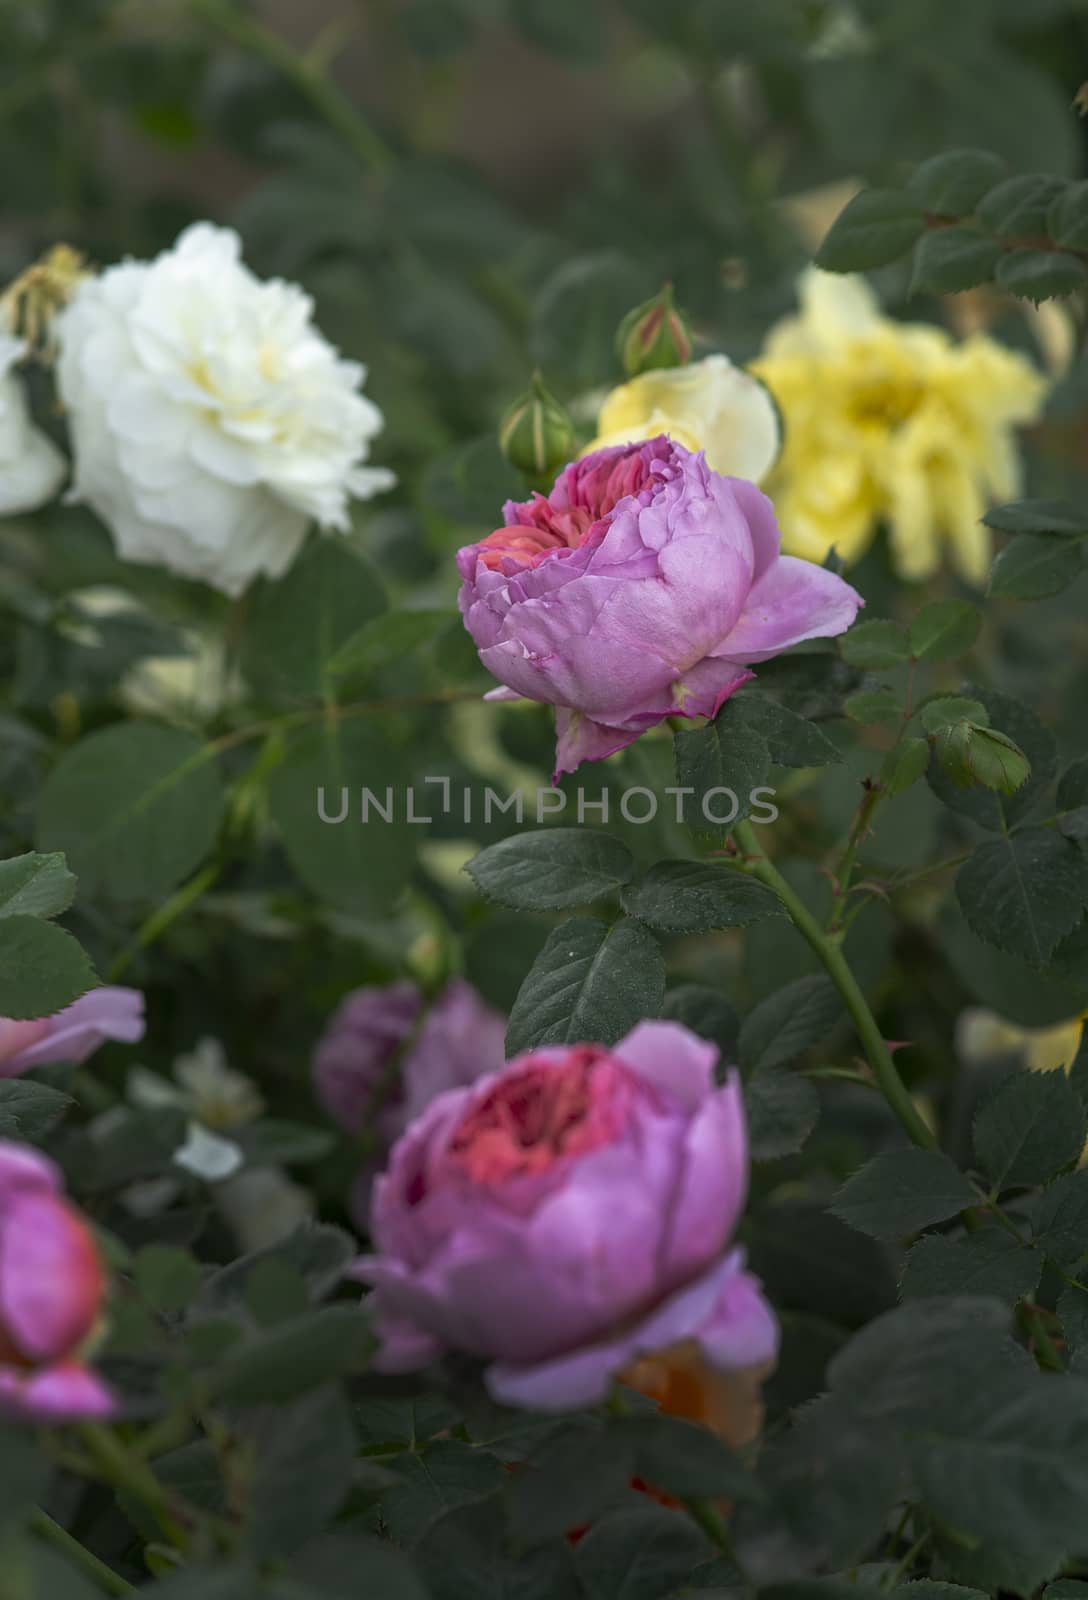 Beautiful two-toned rose flowers closeup by ArtesiaWells